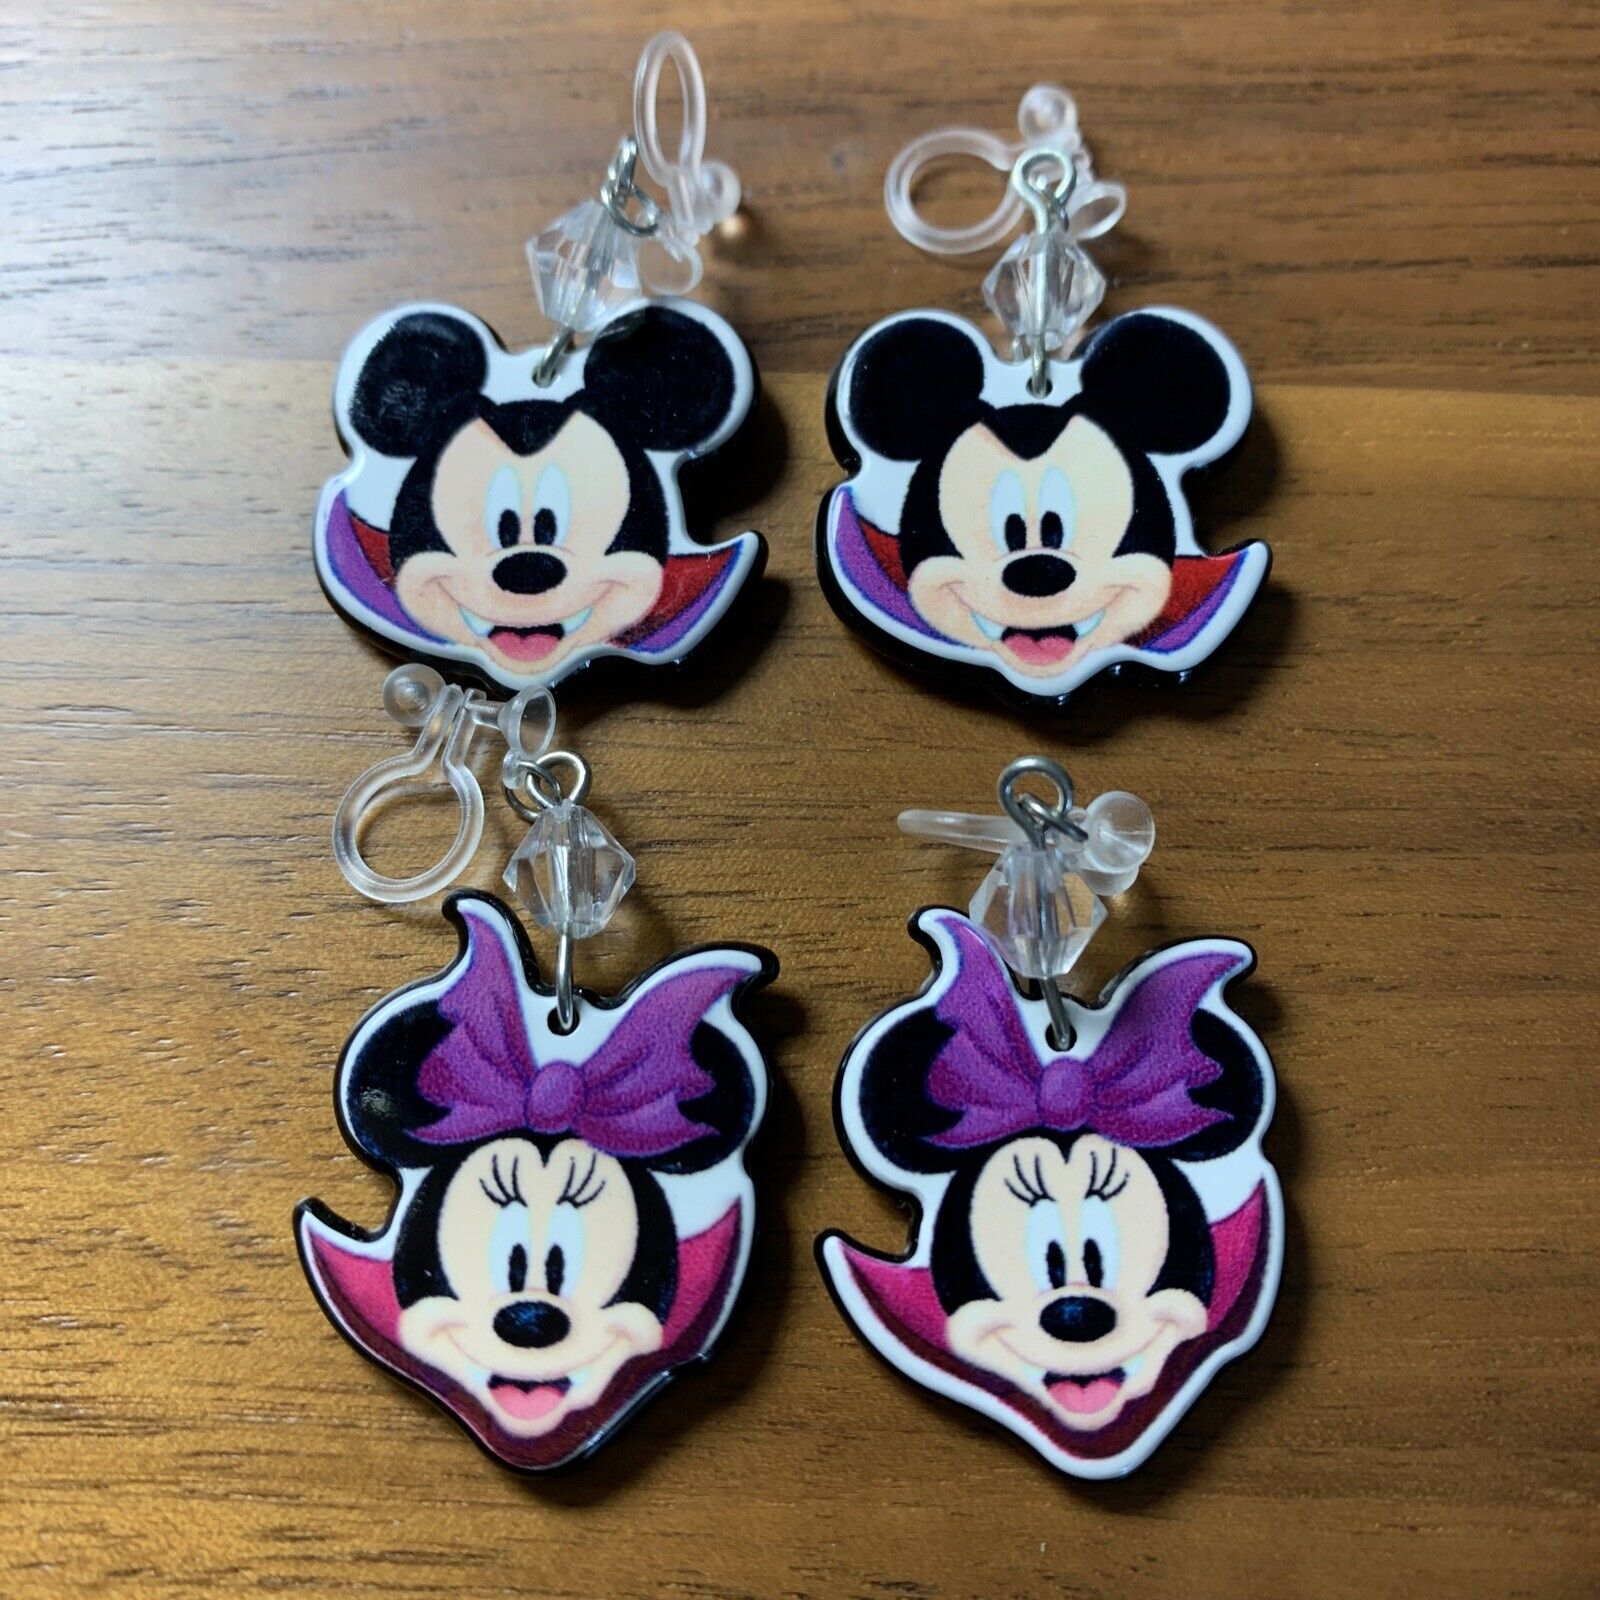 Authentic Disney Happy Halloween Clip On Earrings Mickey & Minnie collectible